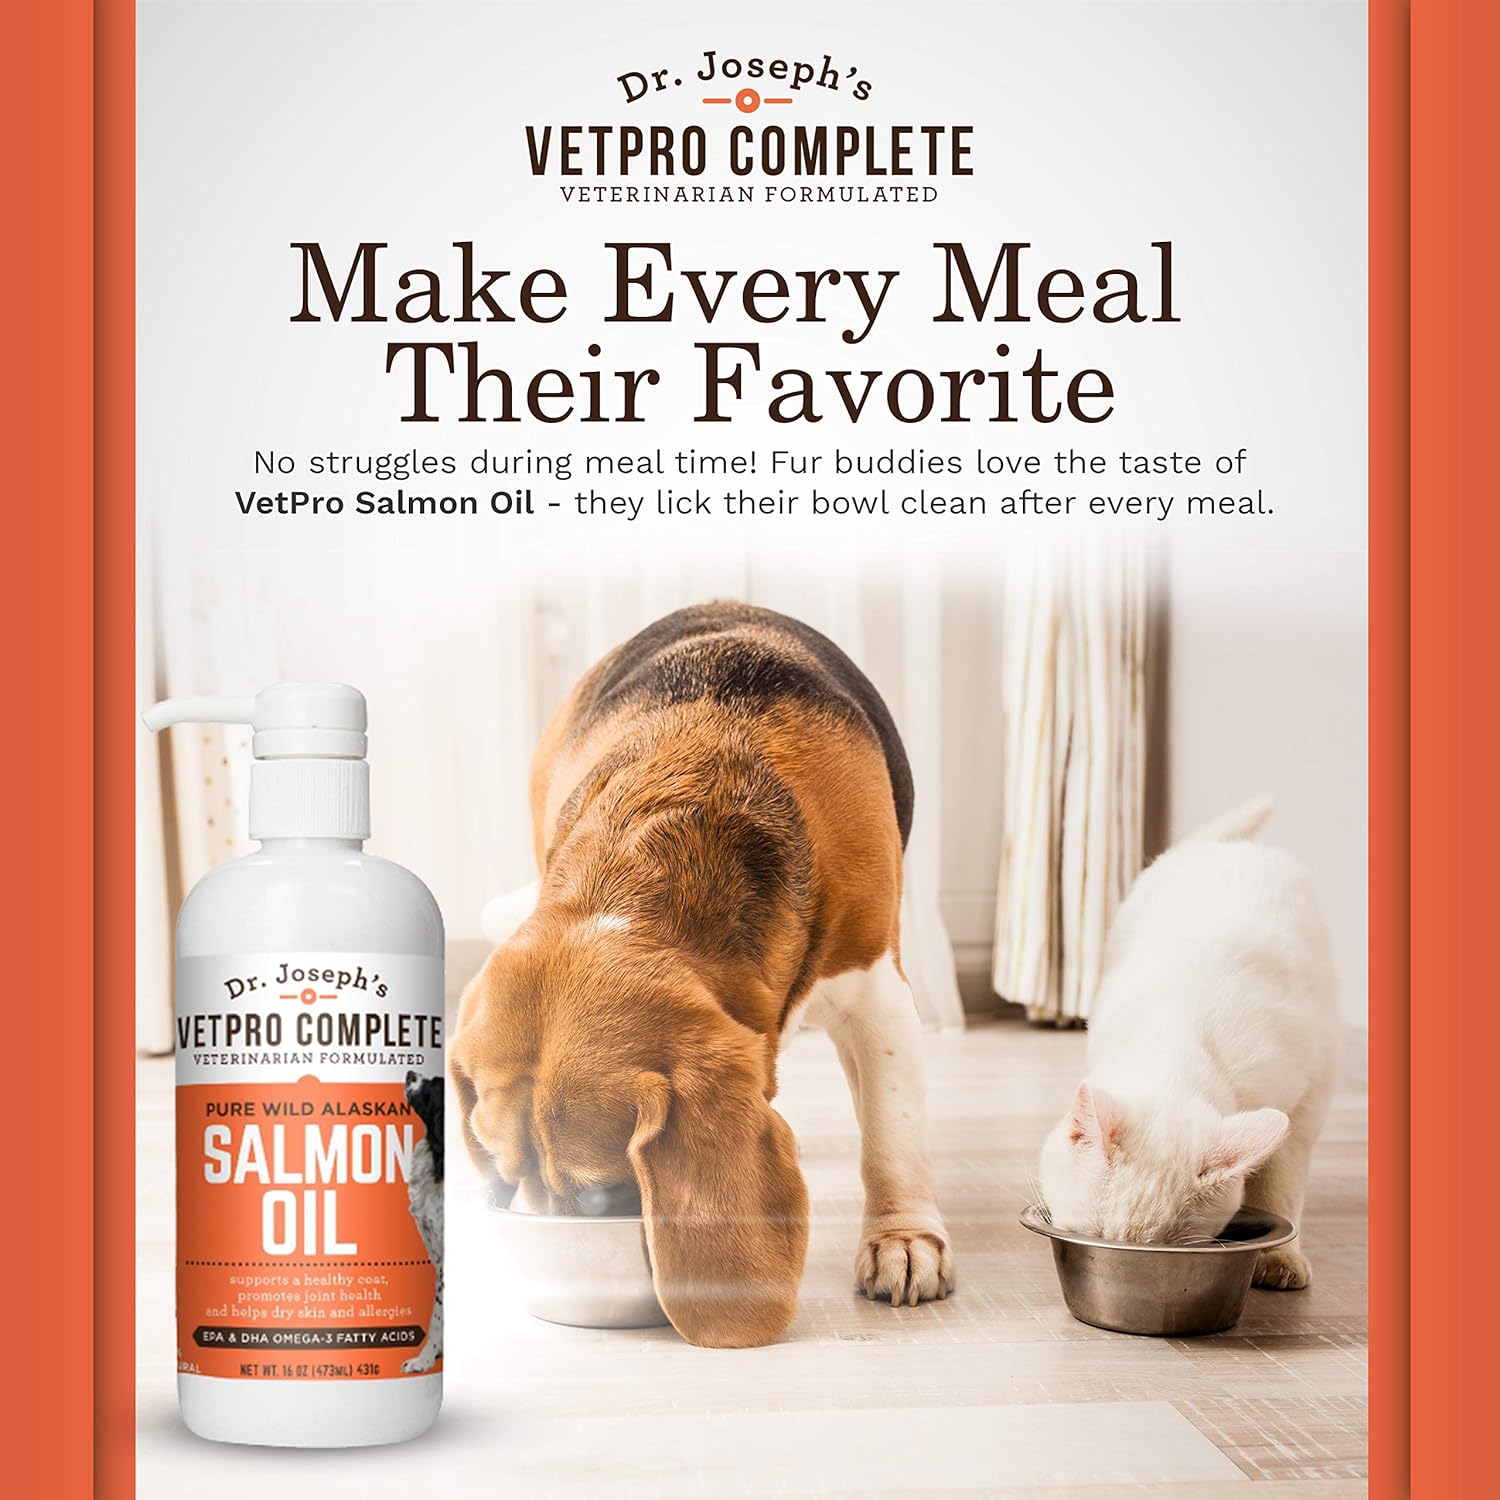 VetPro 100% Pure Wild Alaskan Salmon Oil Supplement for Dogs & Cats, 16 Ounces, Omega 3 & 6 Liquid Fish Oil, Supports Healthy Coat & Joints, Helps Dry Skin & Allergies, Add to Food : Pet Supplies